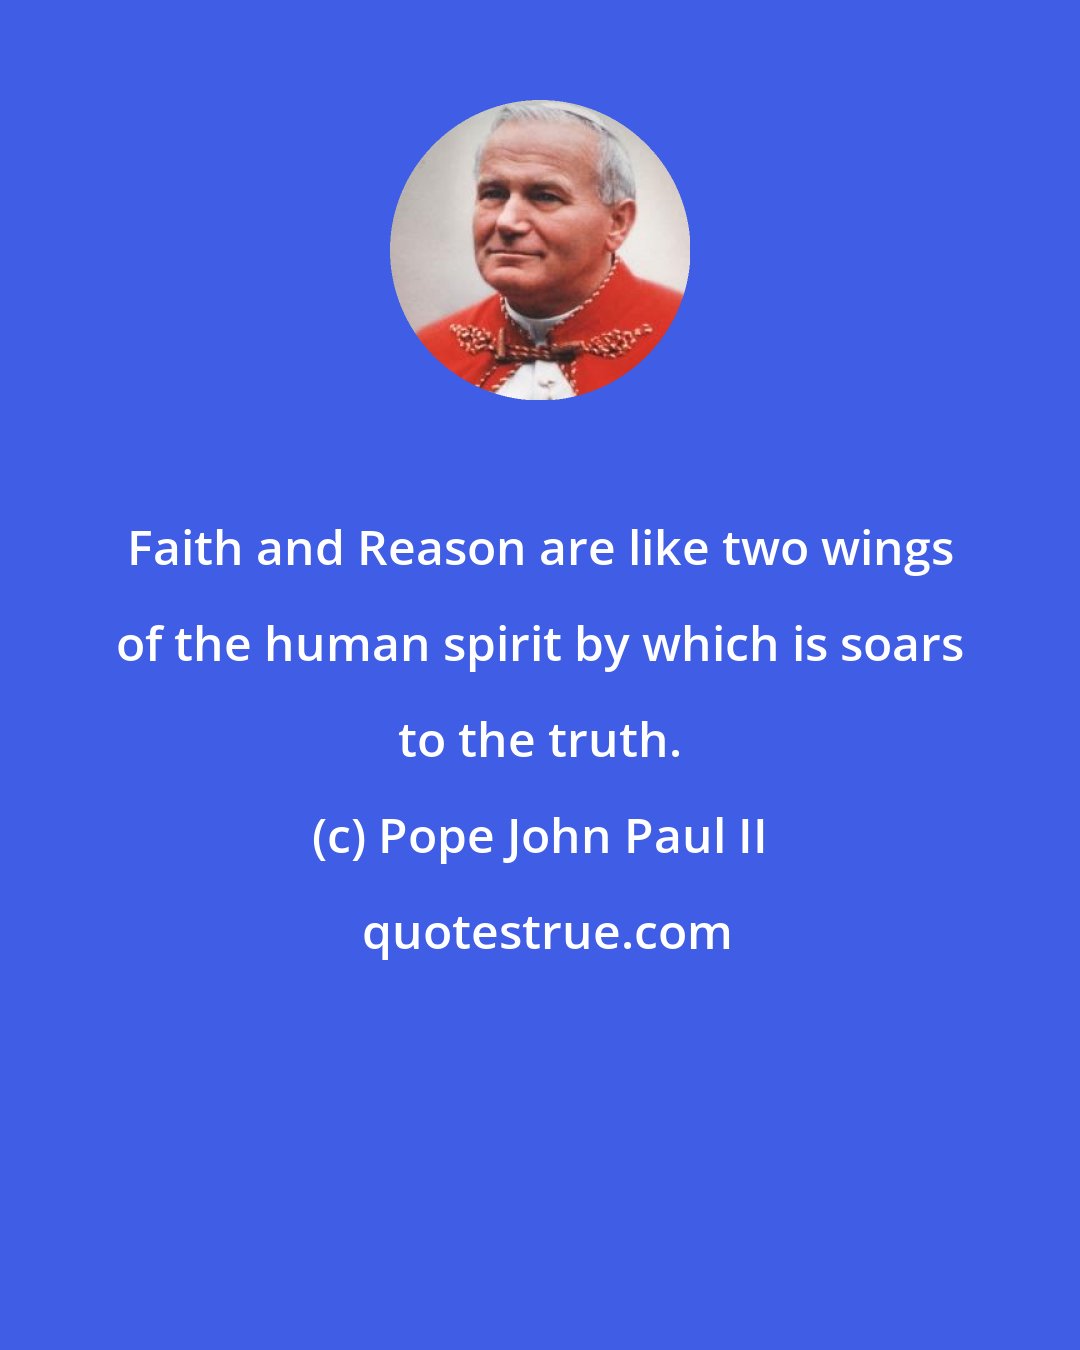 Pope John Paul II: Faith and Reason are like two wings of the human spirit by which is soars to the truth.